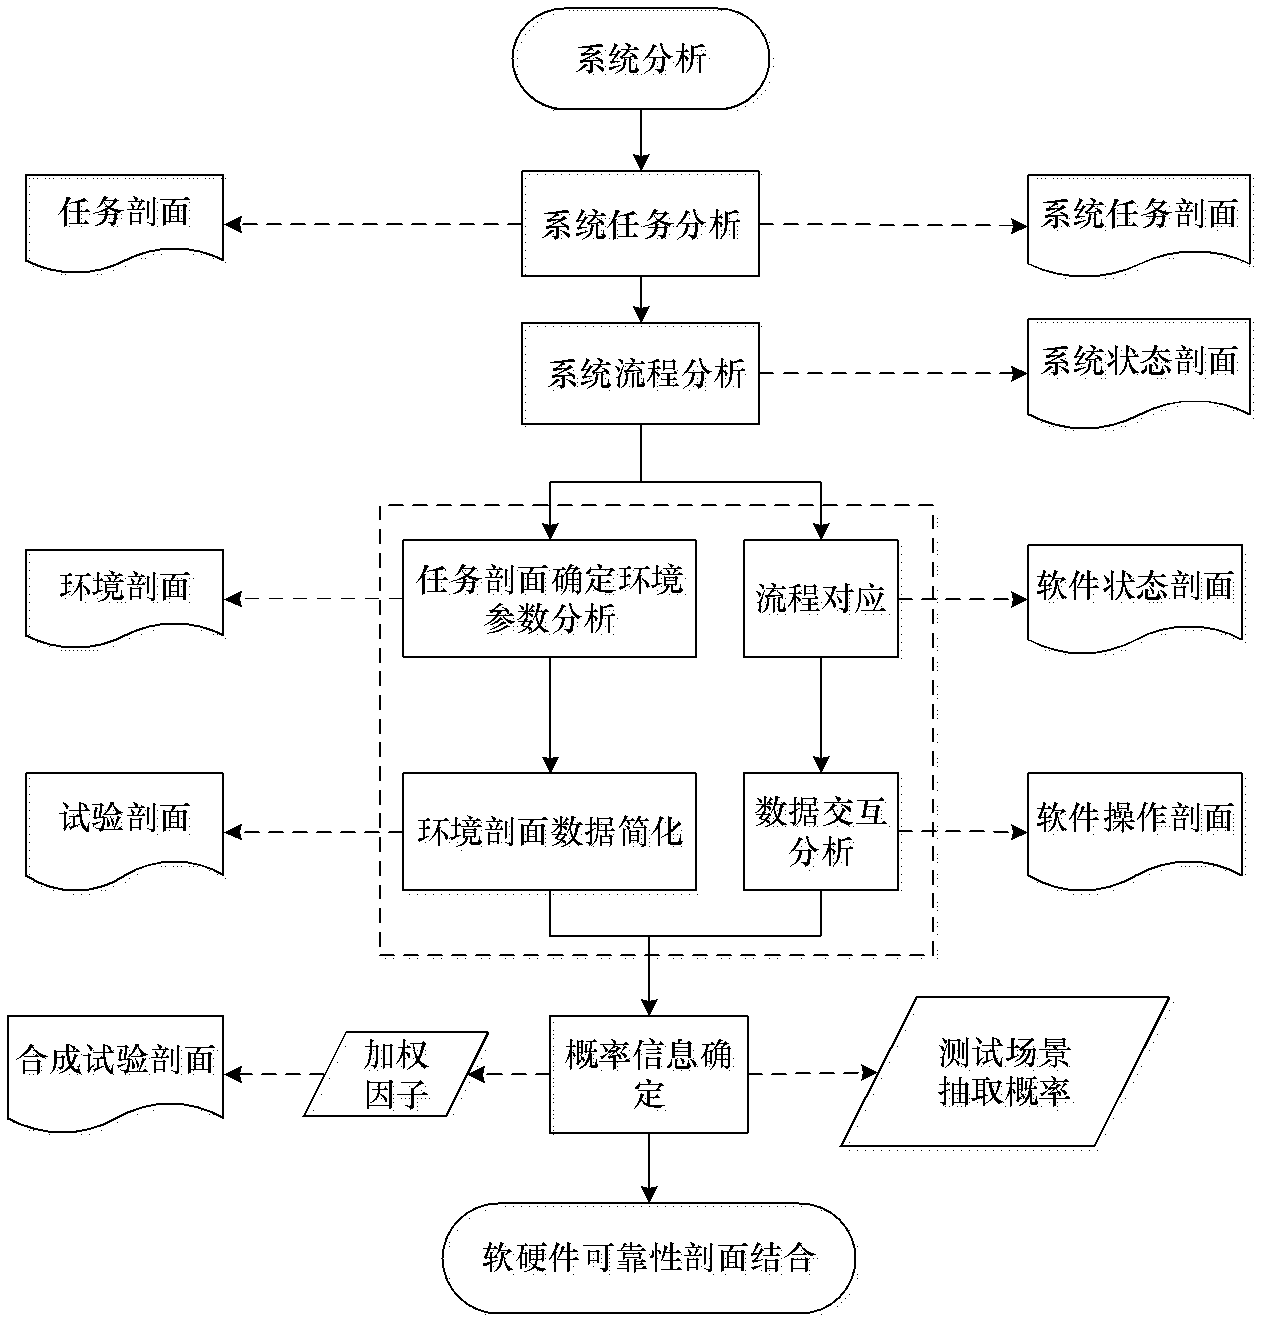 Constitution method of comprehensive reliability testing profile for both software and hardware